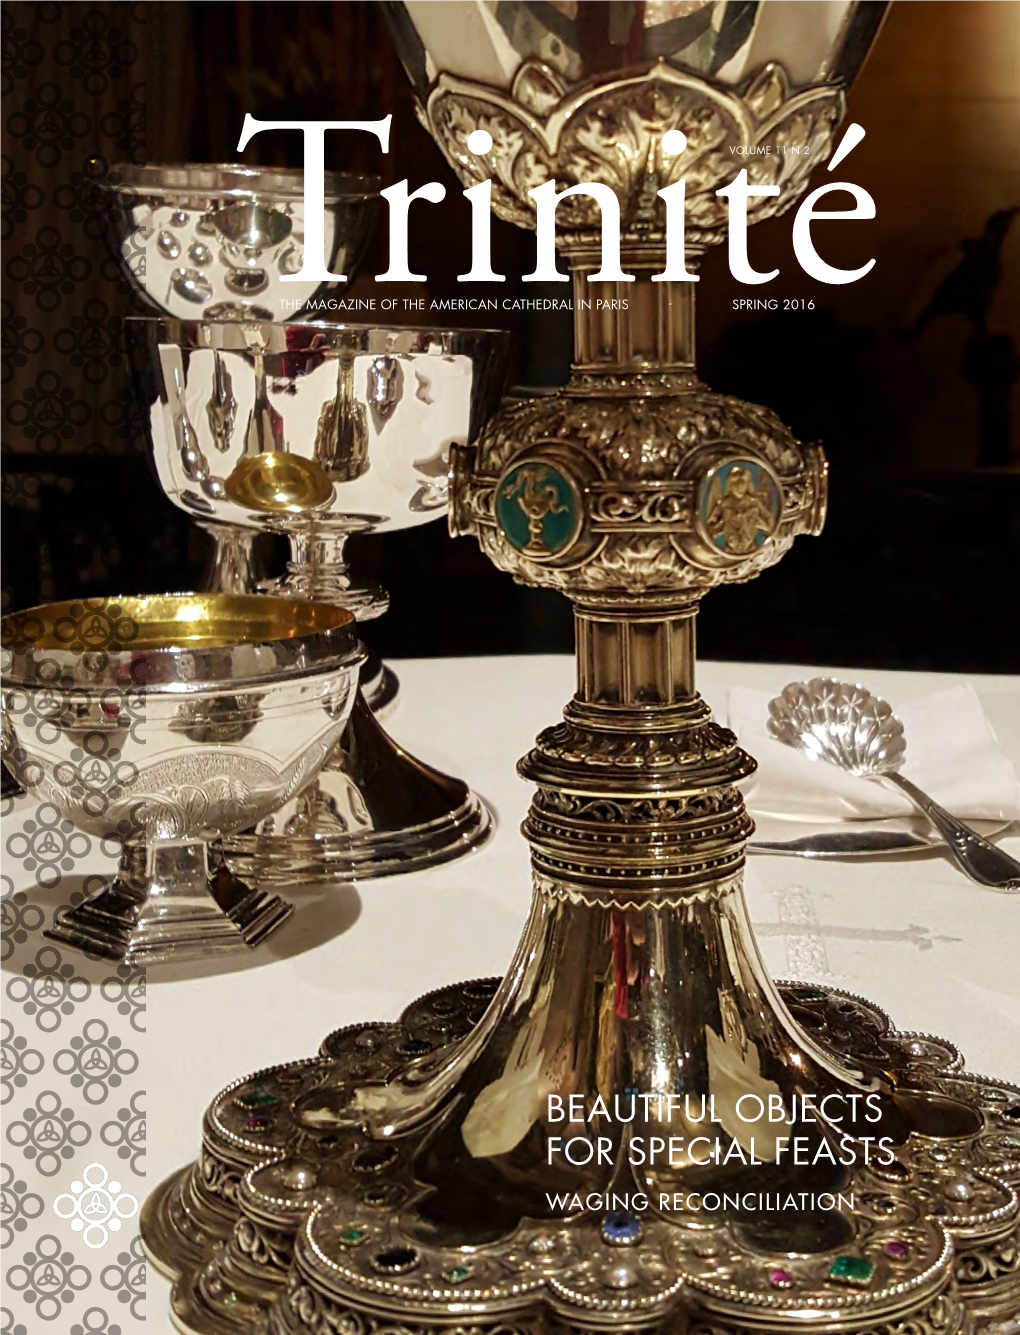 BEAUTIFUL OBJECTS for SPECIAL FEASTS WAGING RECONCILIATION the Magazine of the American Cathedral in Paris SPRING 2016 - VOLUME 11 N 2